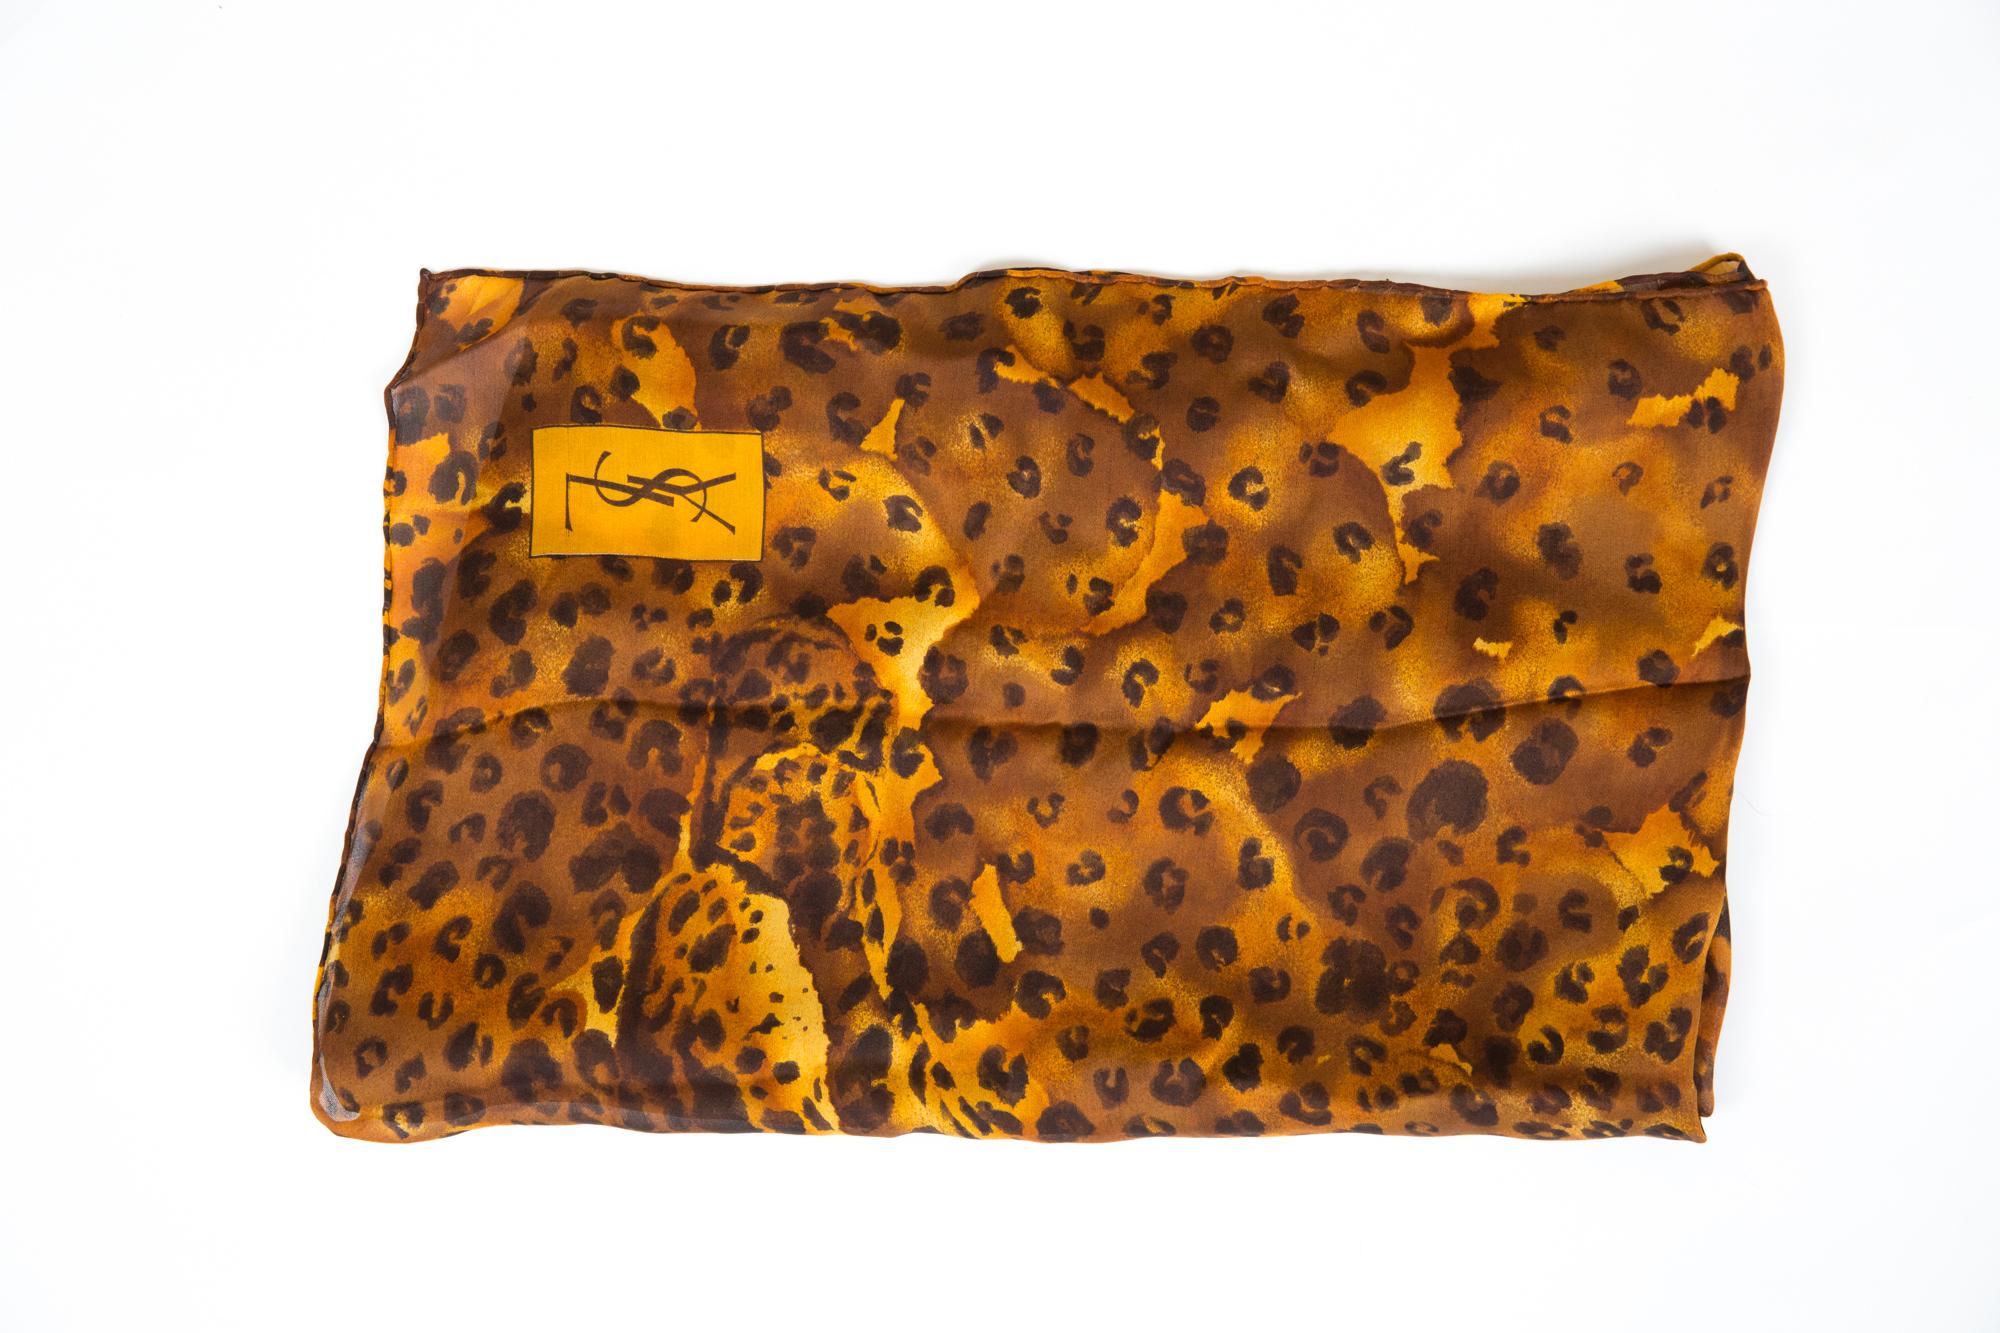 Gorgeous Saint Laurent large panther print silk shawl featuring animal heads, animal pattern, a YSL signature.
Marked YSL
69.2in (176cm) X 35,4in. (90cm)  In excellent vintage condition.  
Made in France.  
We guarantee you will receive this